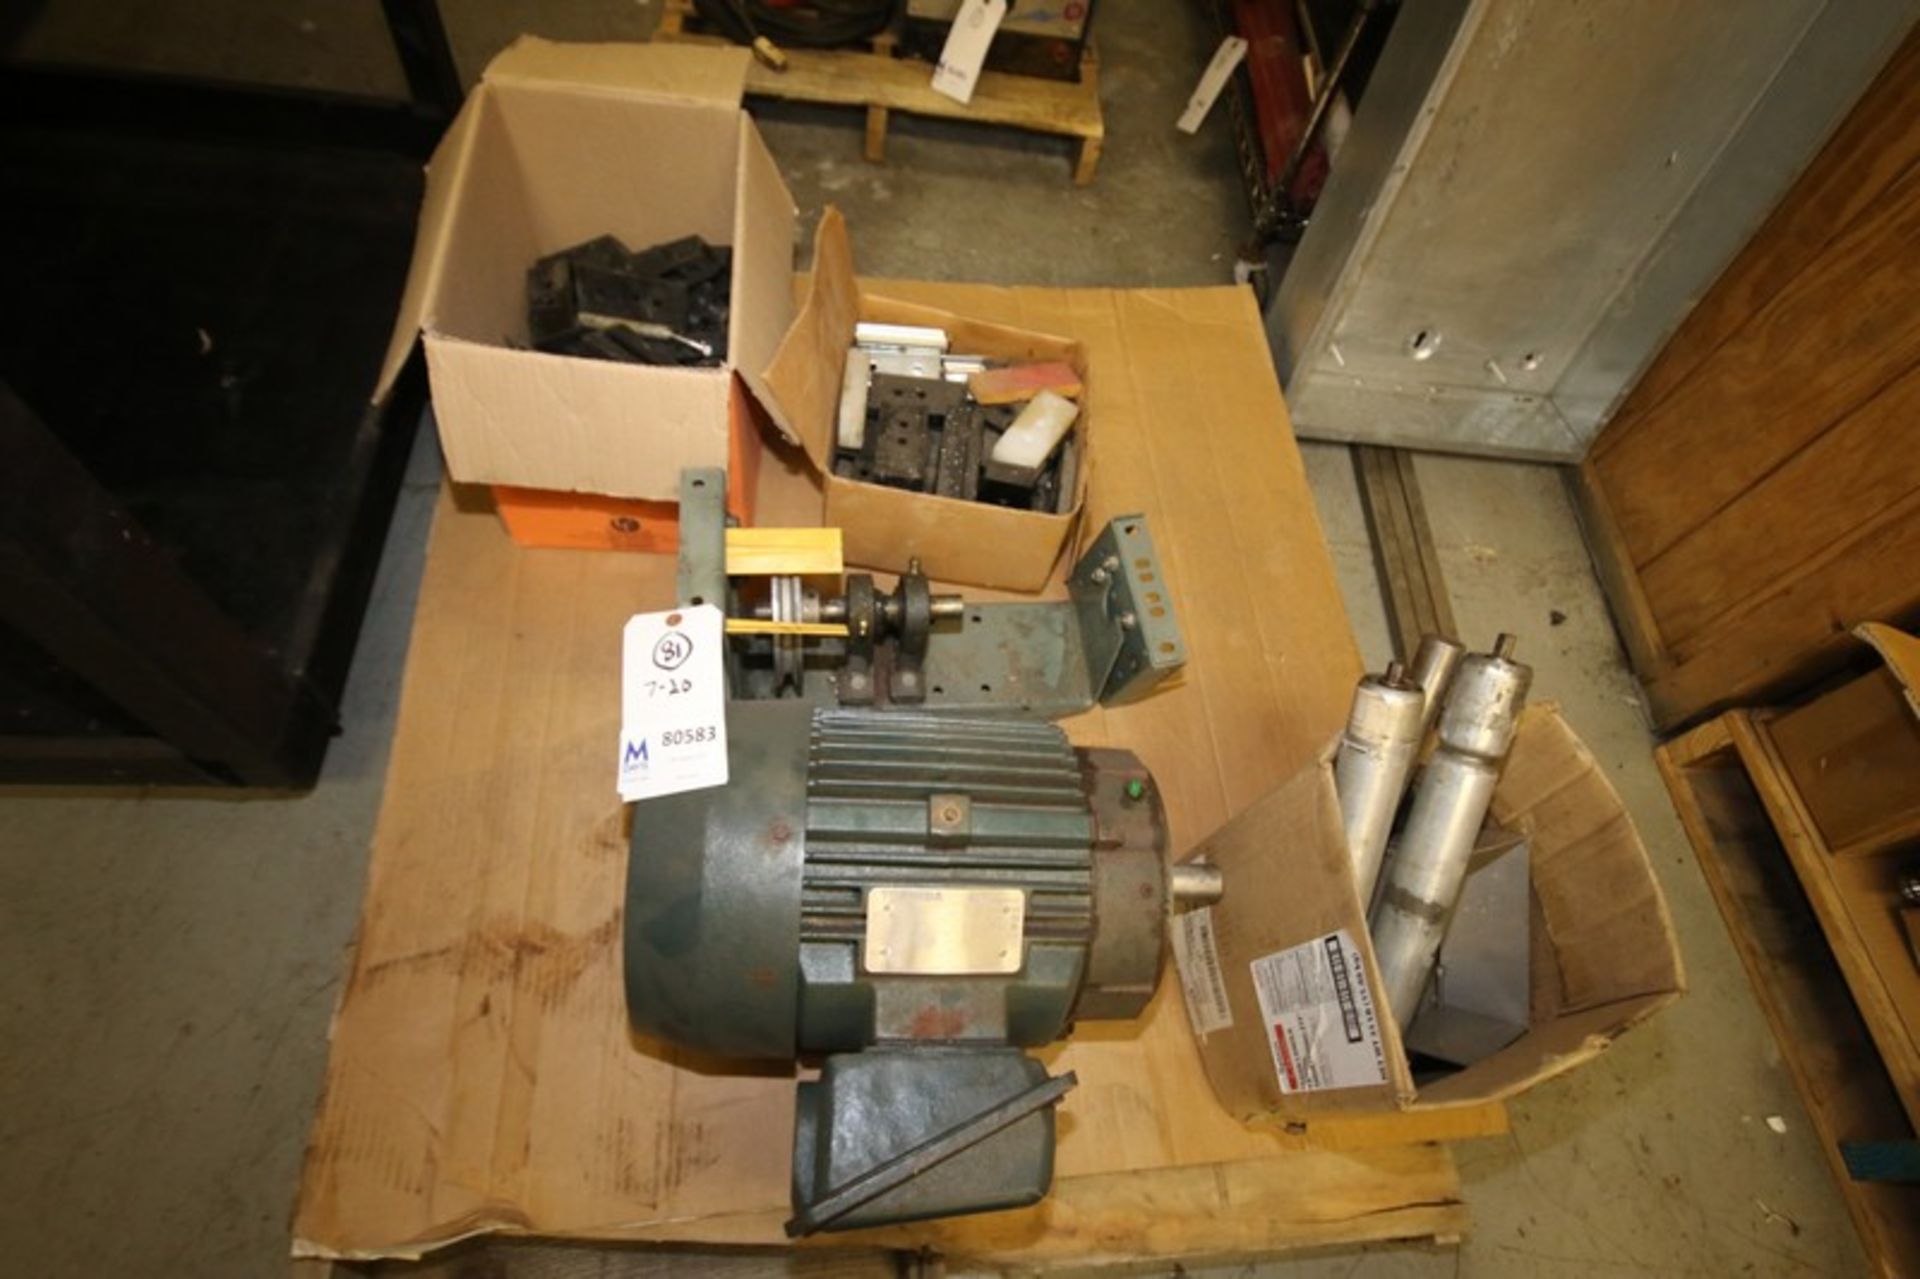 Toshiba 7.5 hp/1760 rpm Motor, 460V 3 Phase with Assorted Conveyor Parts (INV#80583)(Located @ the